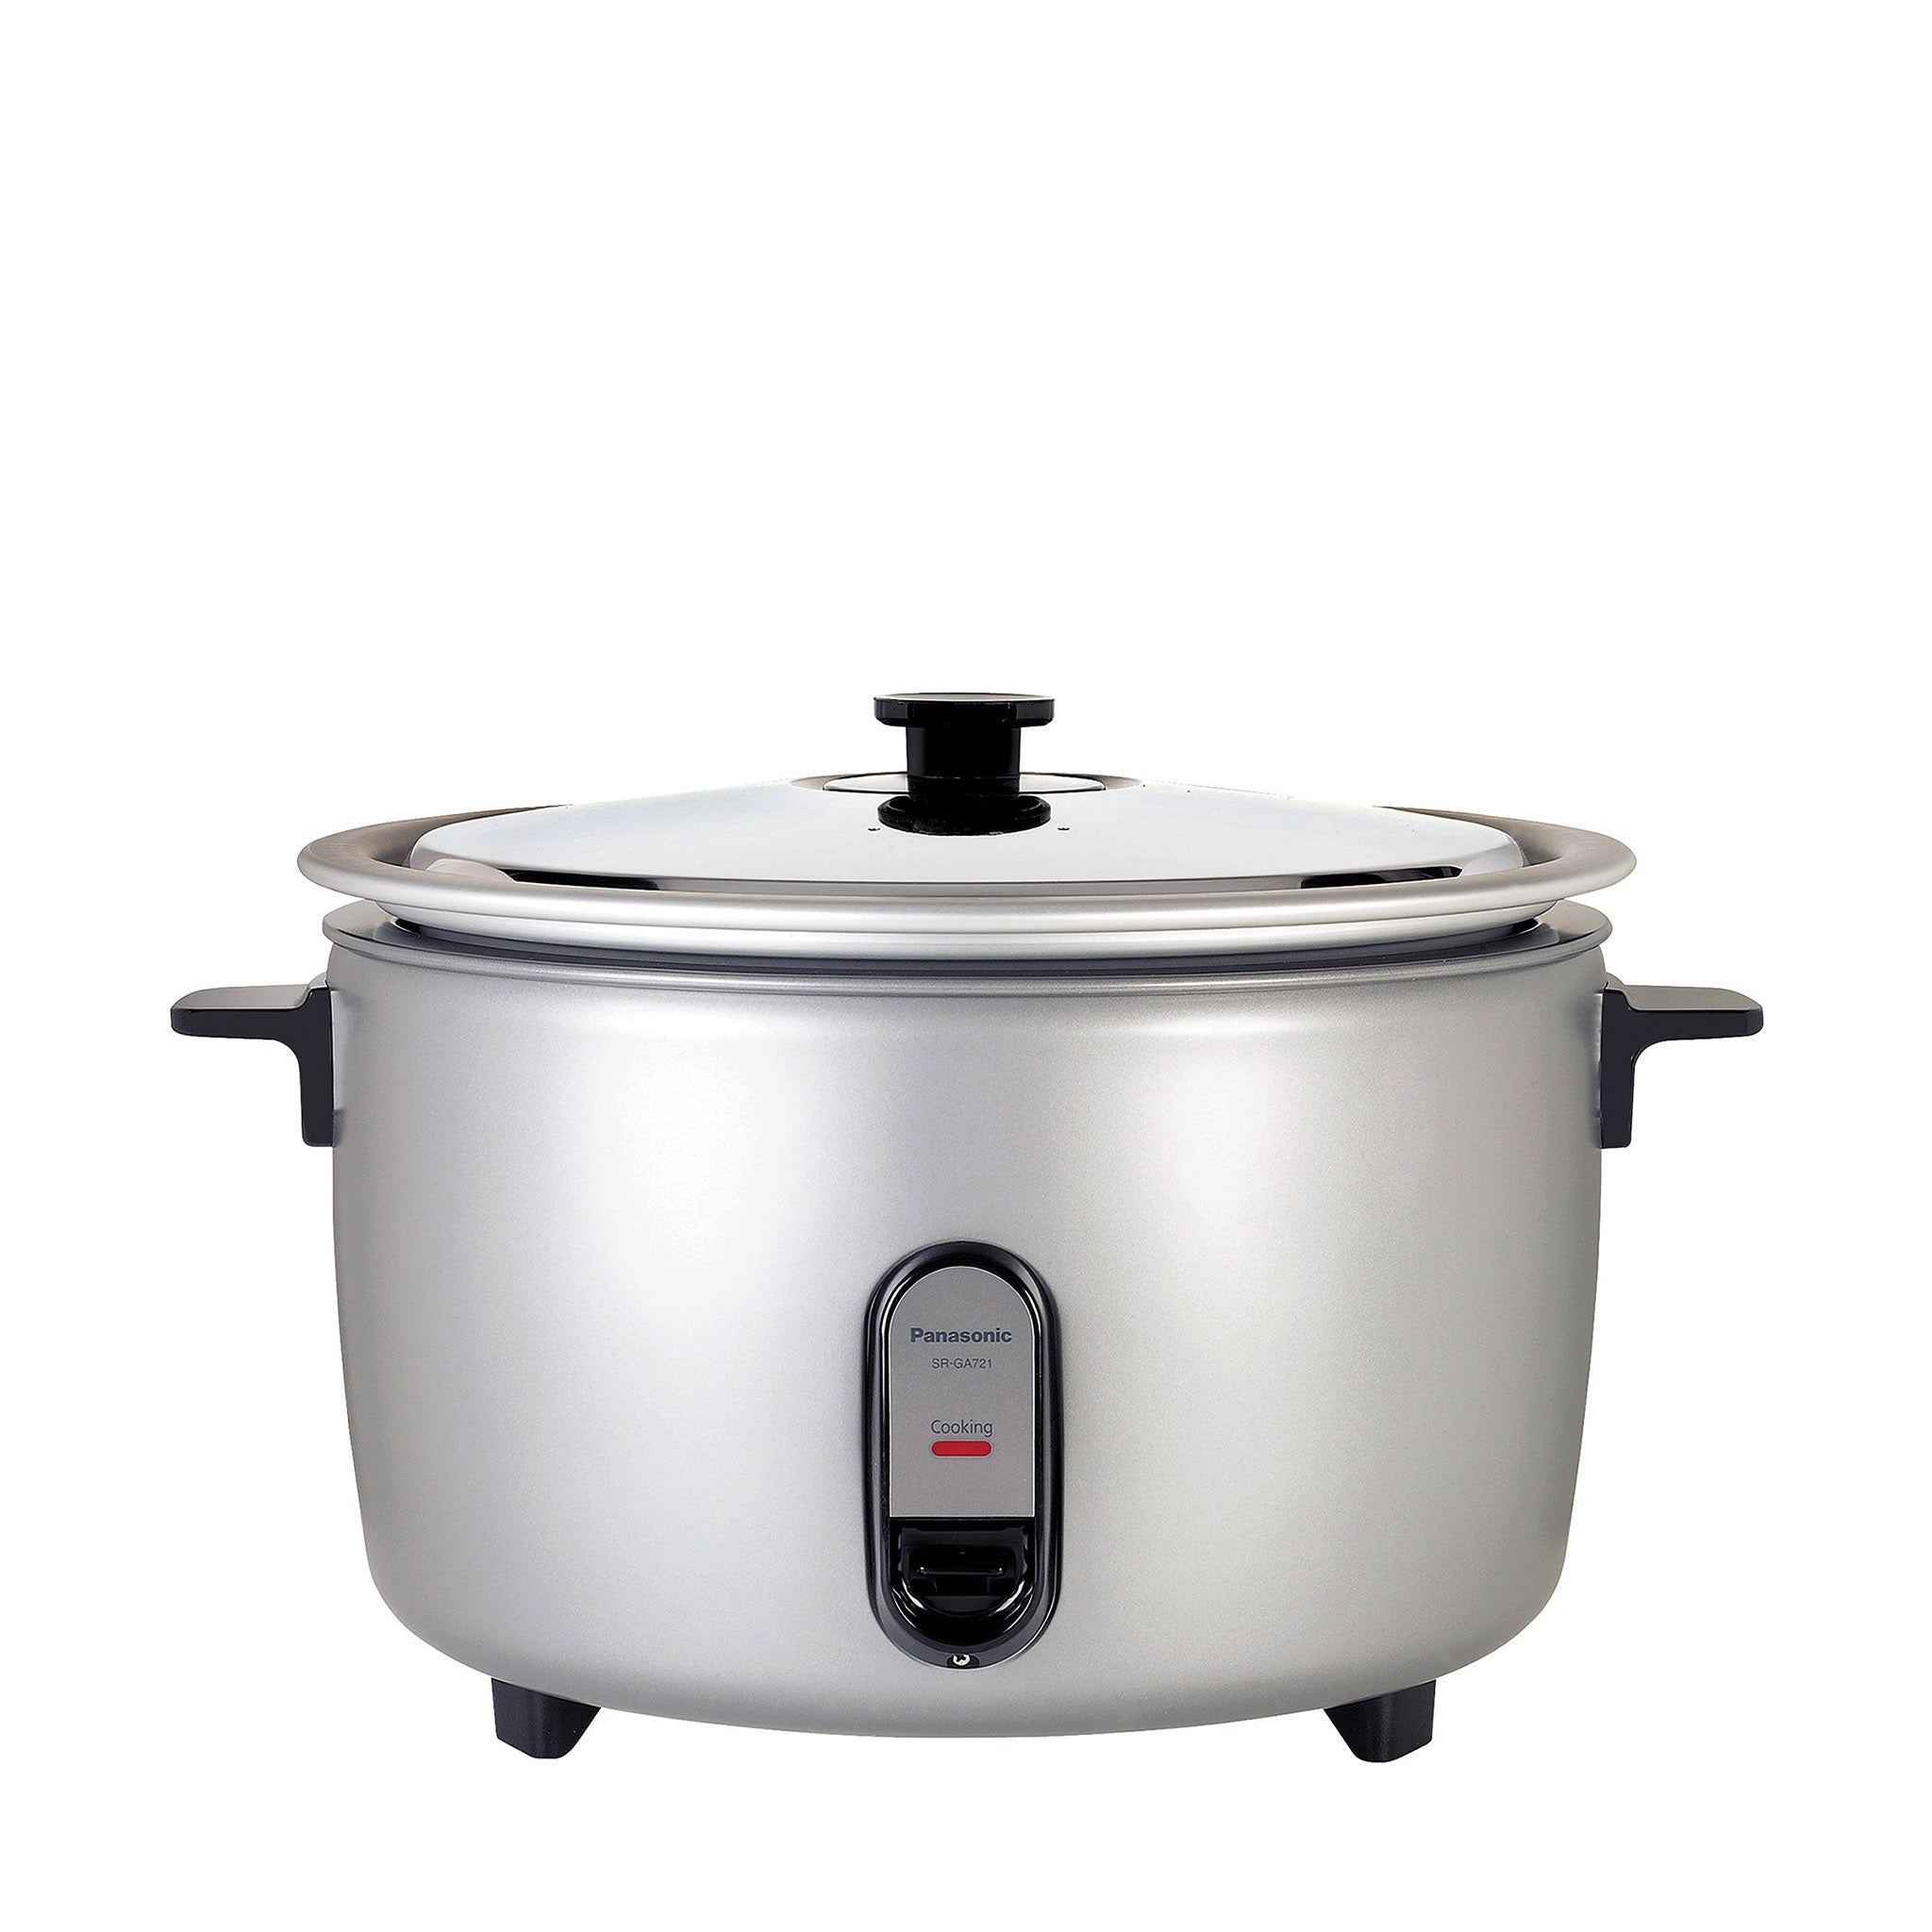 4 Cup Rice Cooker - Convenient Cooking 